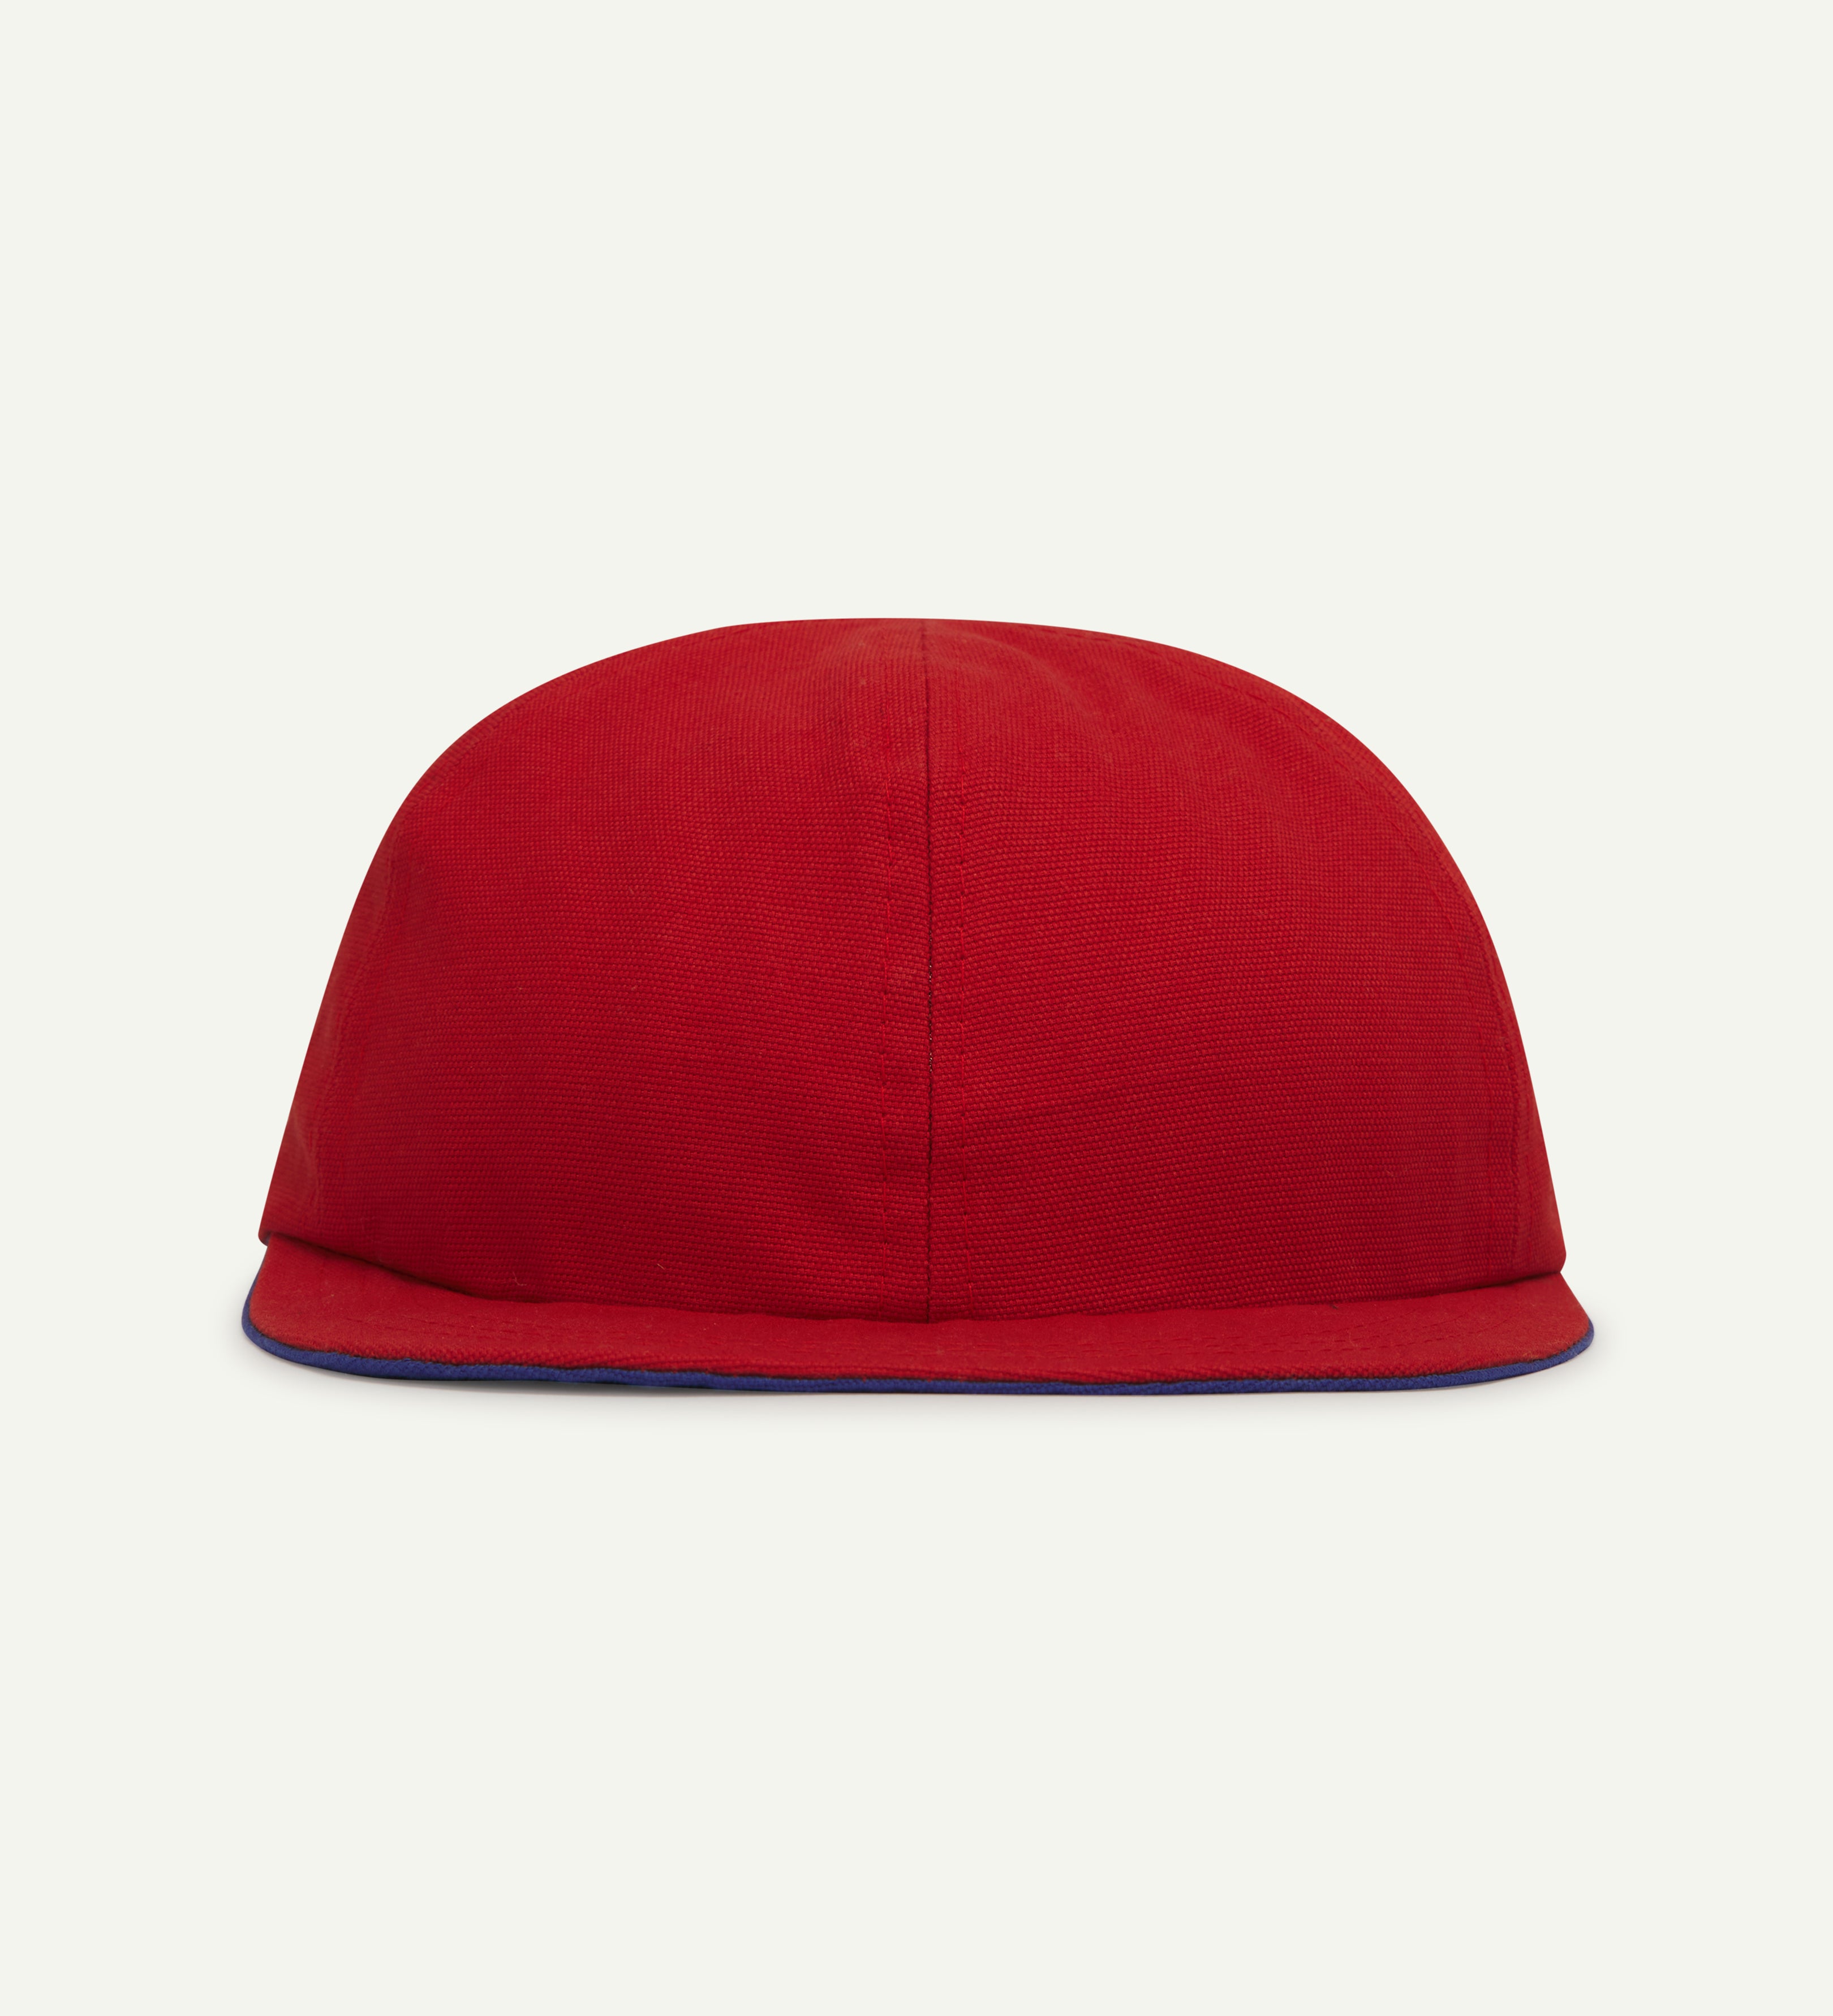 Front view of Uskees deadstock 6-panel cap in red showing front peak